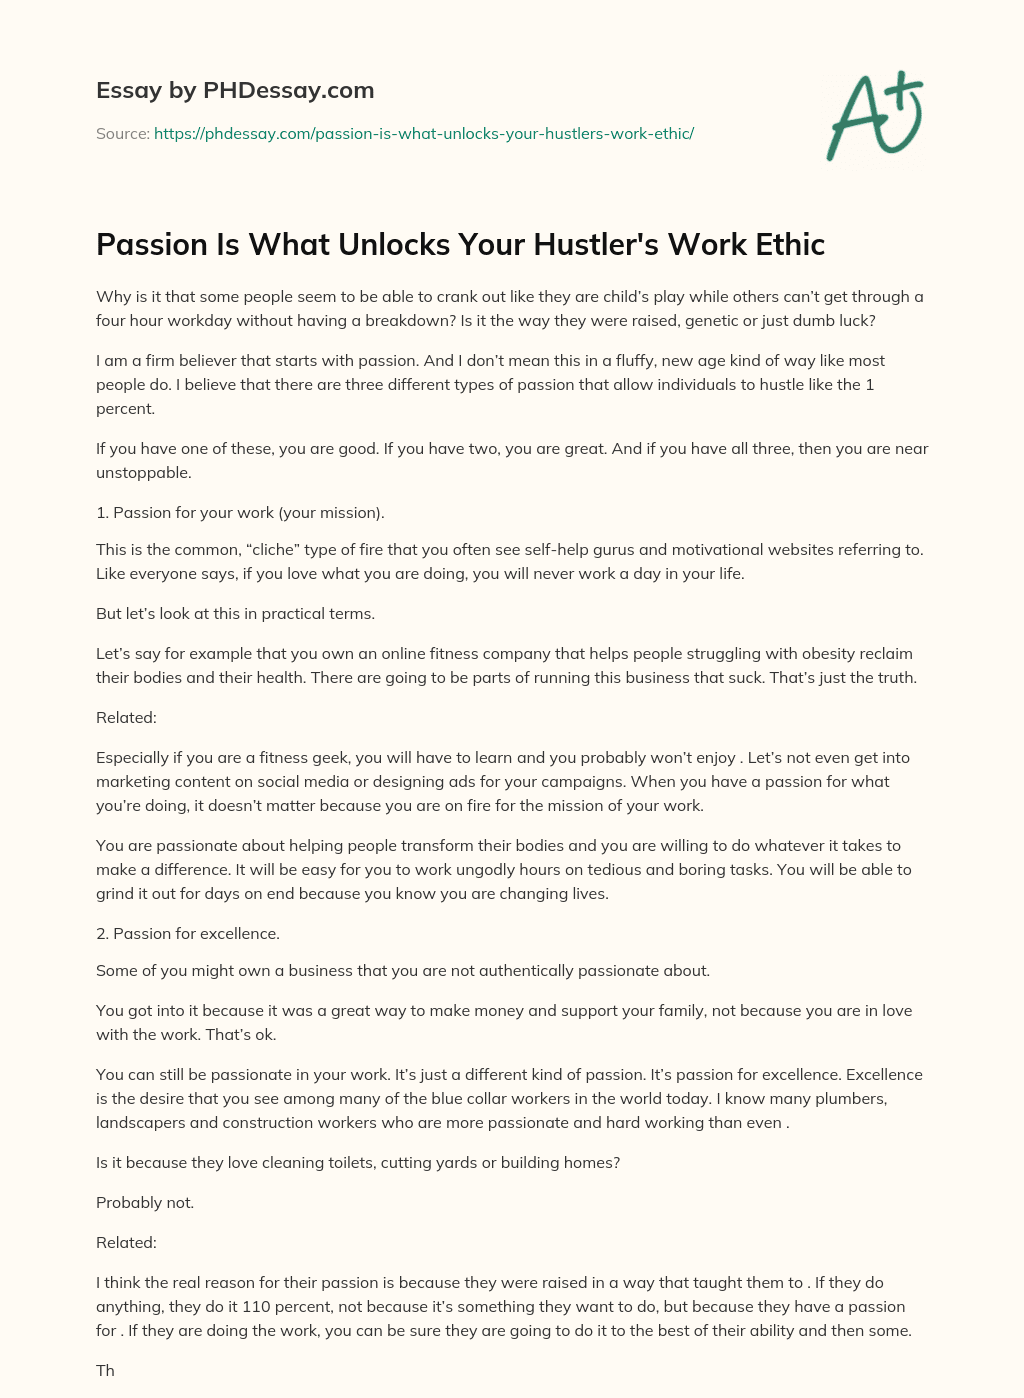 Passion Is What Unlocks Your Hustler’s Work Ethic essay